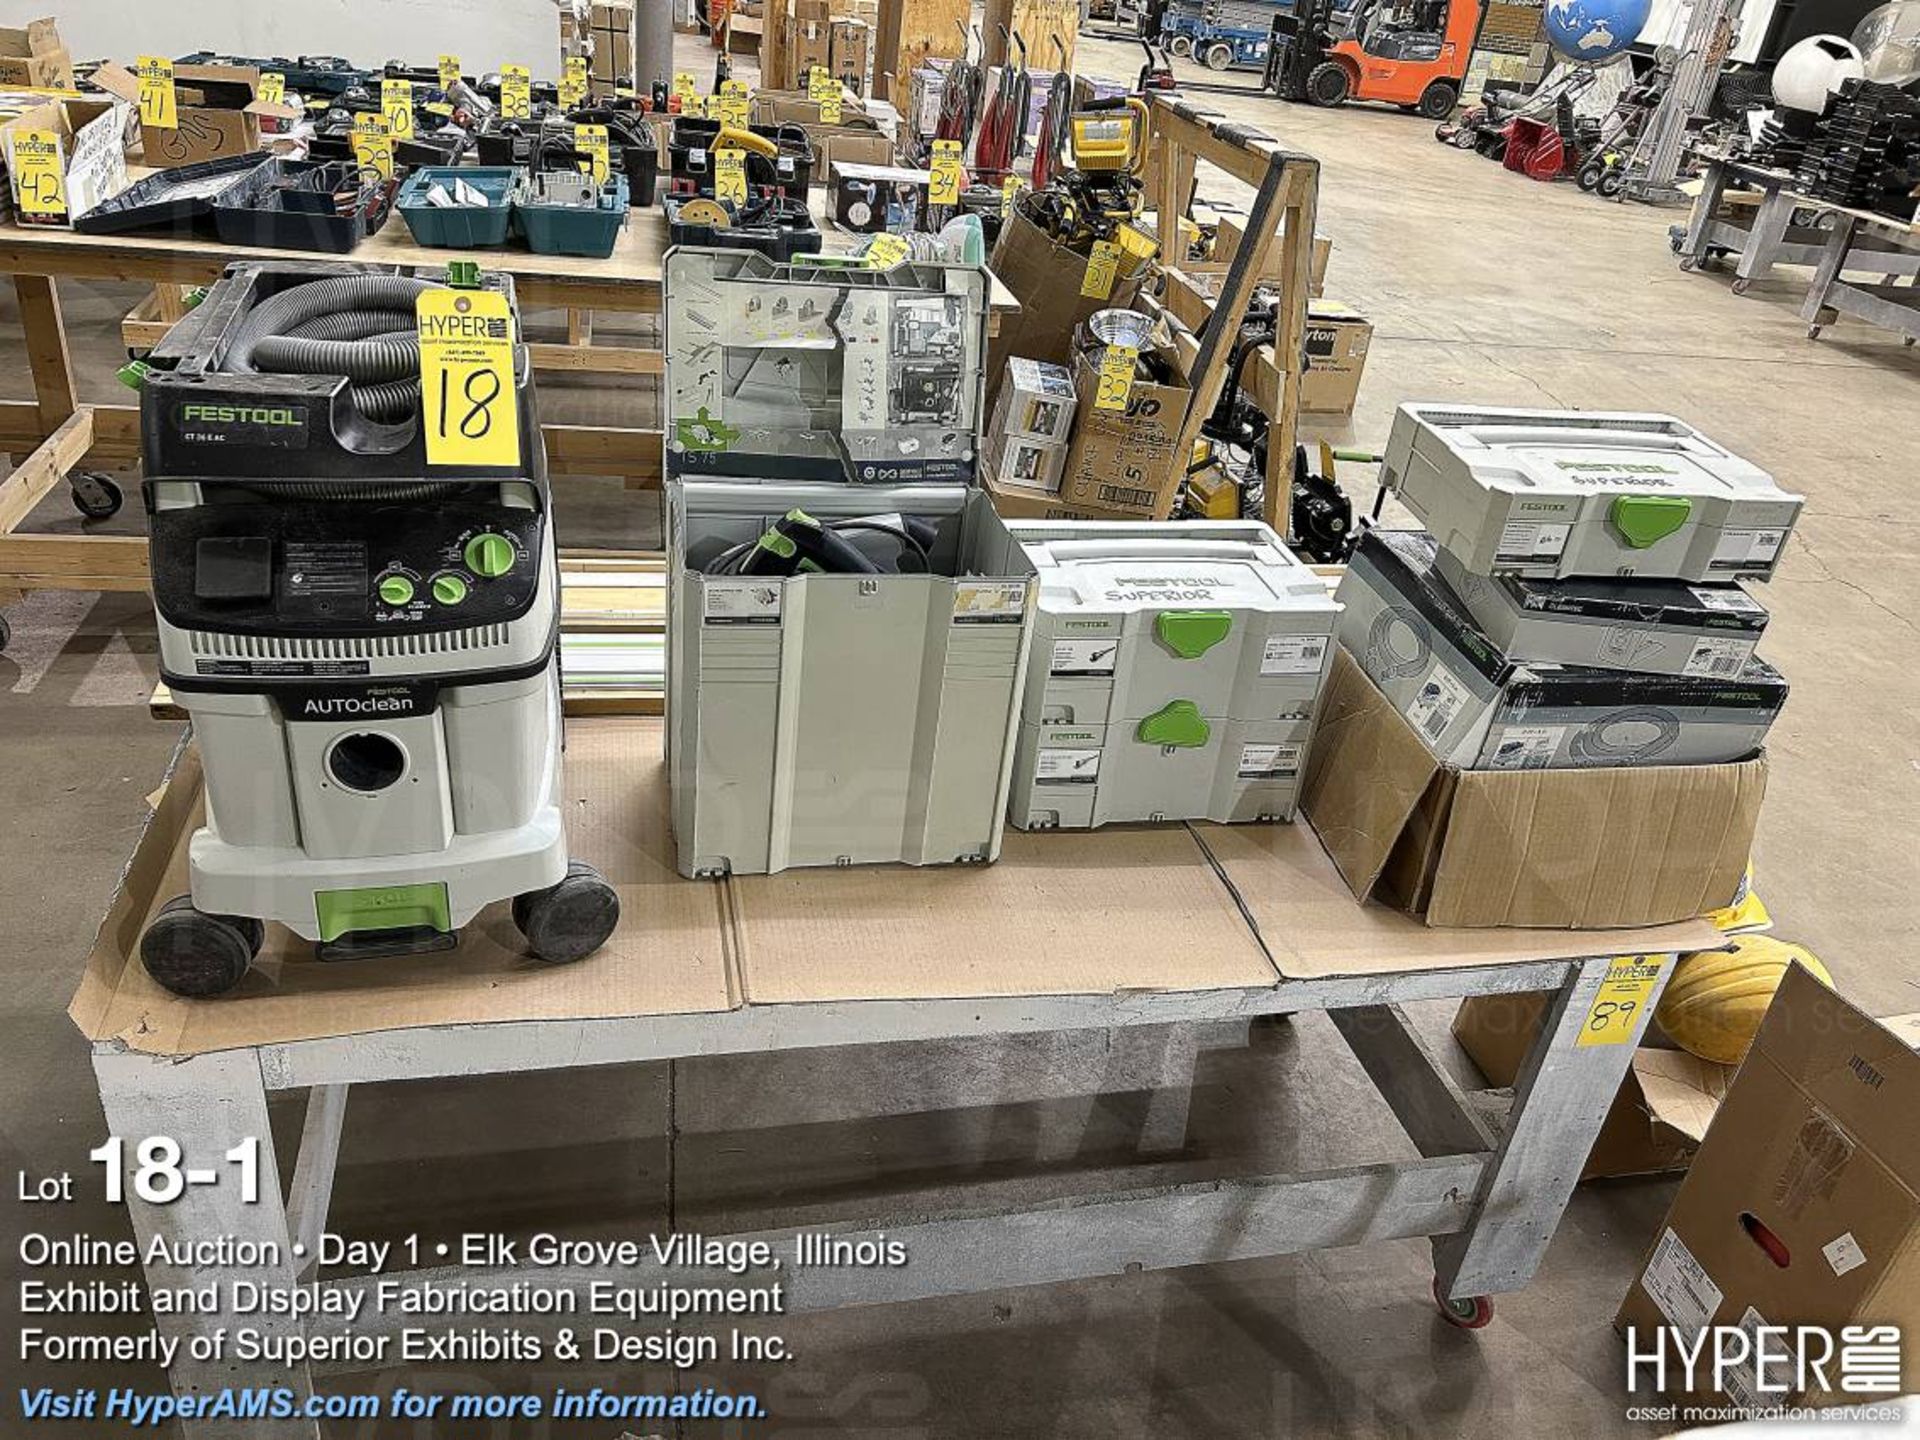 Festool tools and dust extractor